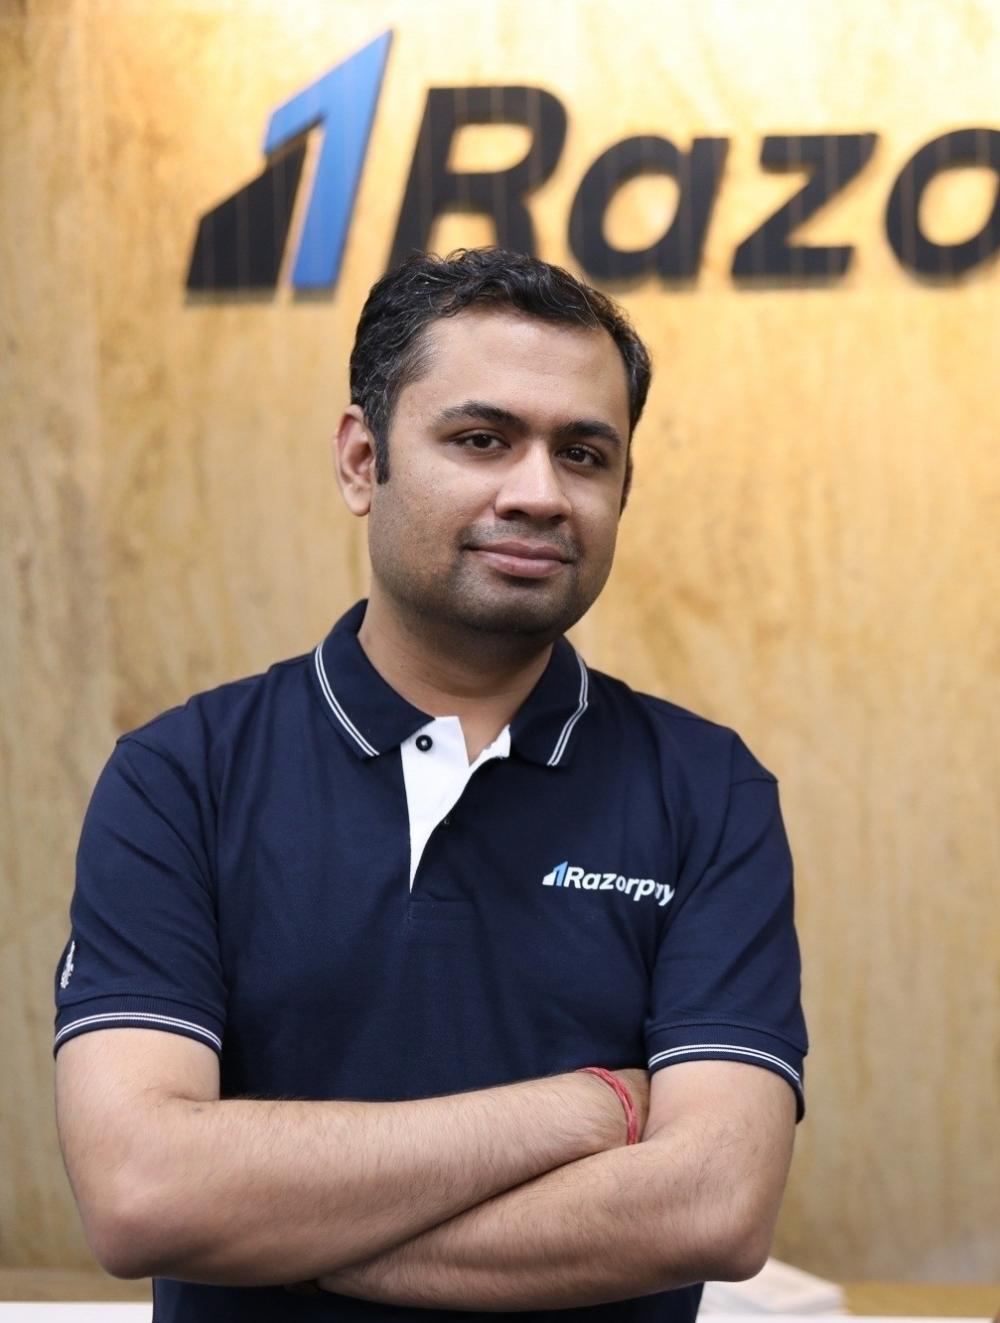 The Weekend Leader - Necessary for us to comply with legal request: Razorpay CEO on Alt News data